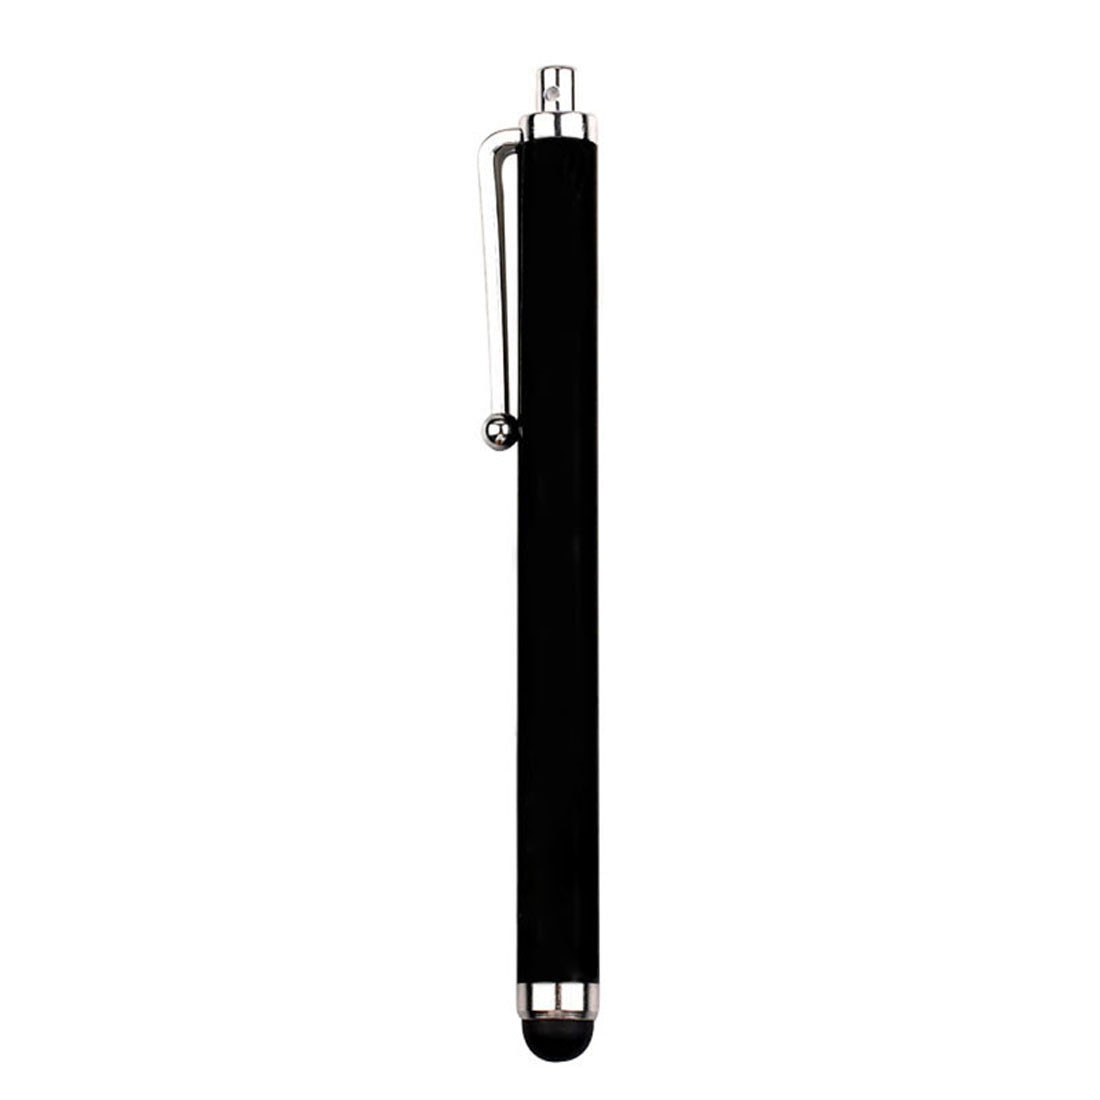 Landfox-Stylus-Touch-Pen-For-Ipad-Iphone-Ipod-Samsung-Htc-Moto-Smartphone-Tablet-Accessories-Support-1005002313079737